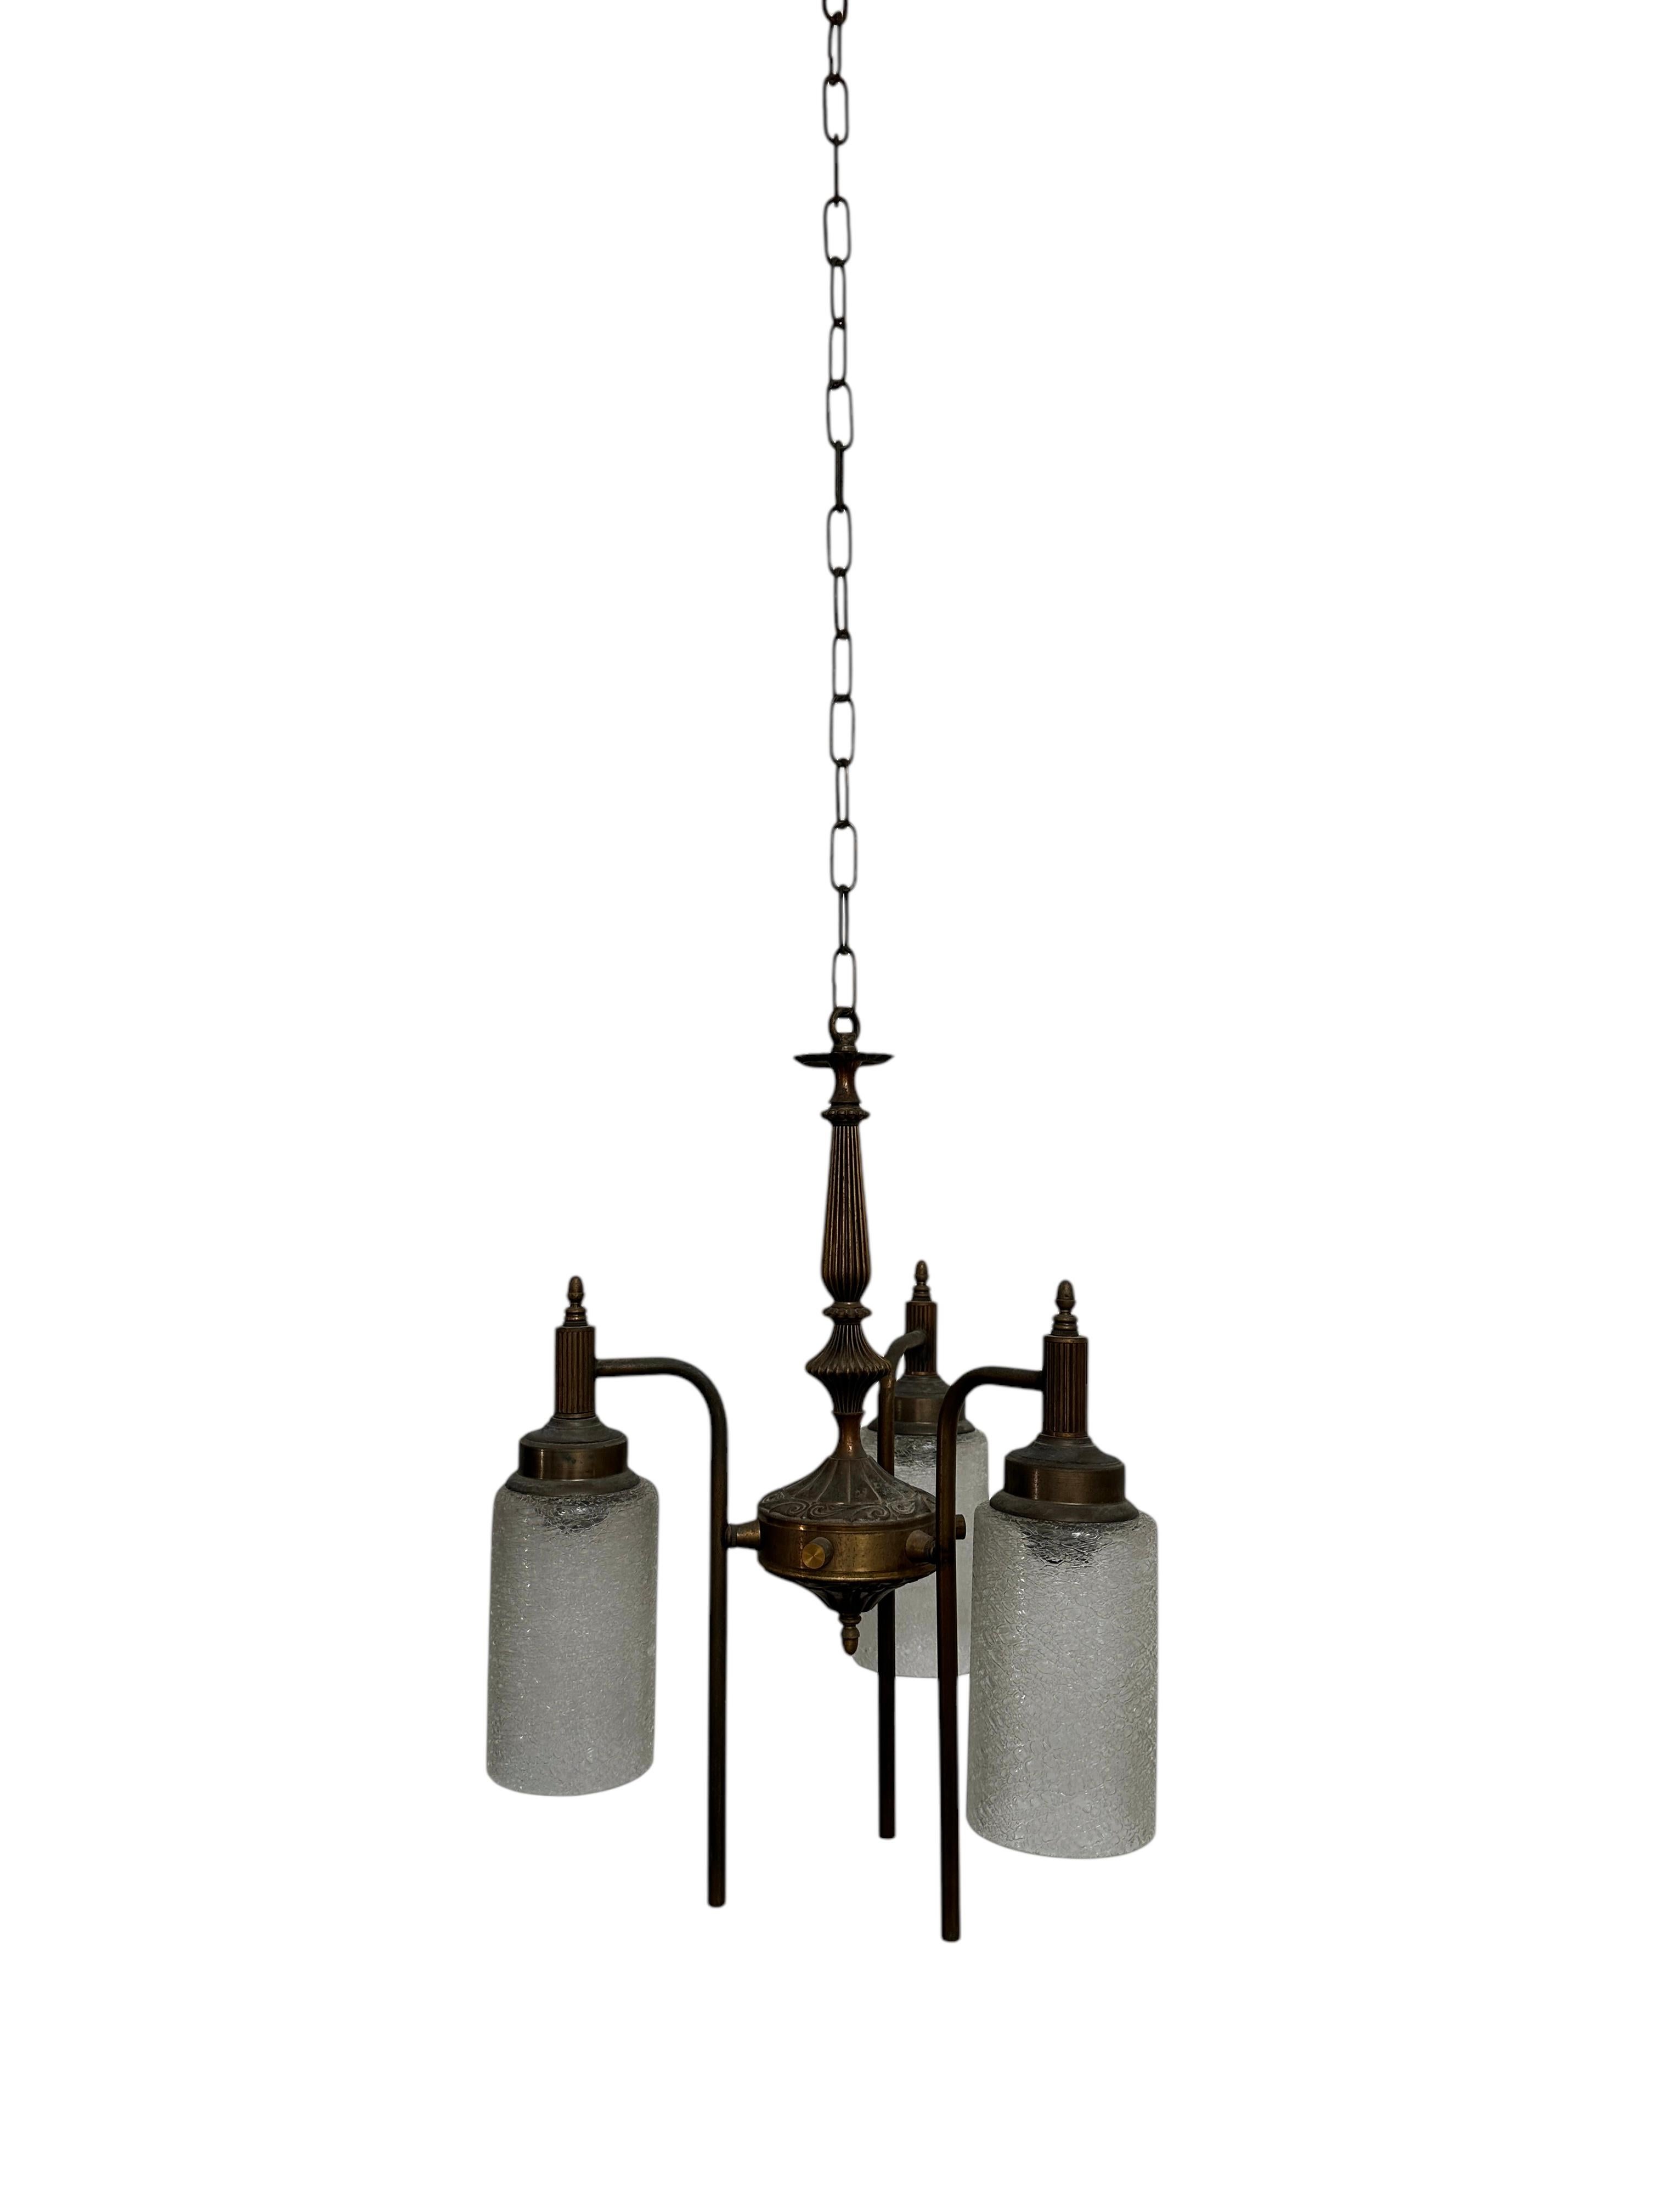 - An exquisite three-arm bronze ceiling chandelier featuring high-quality glasswork, Germany circa 1920.
- The fixture comprises of three arched decorative arms each encompassing an etched glass shade, the central column ribbed with detail